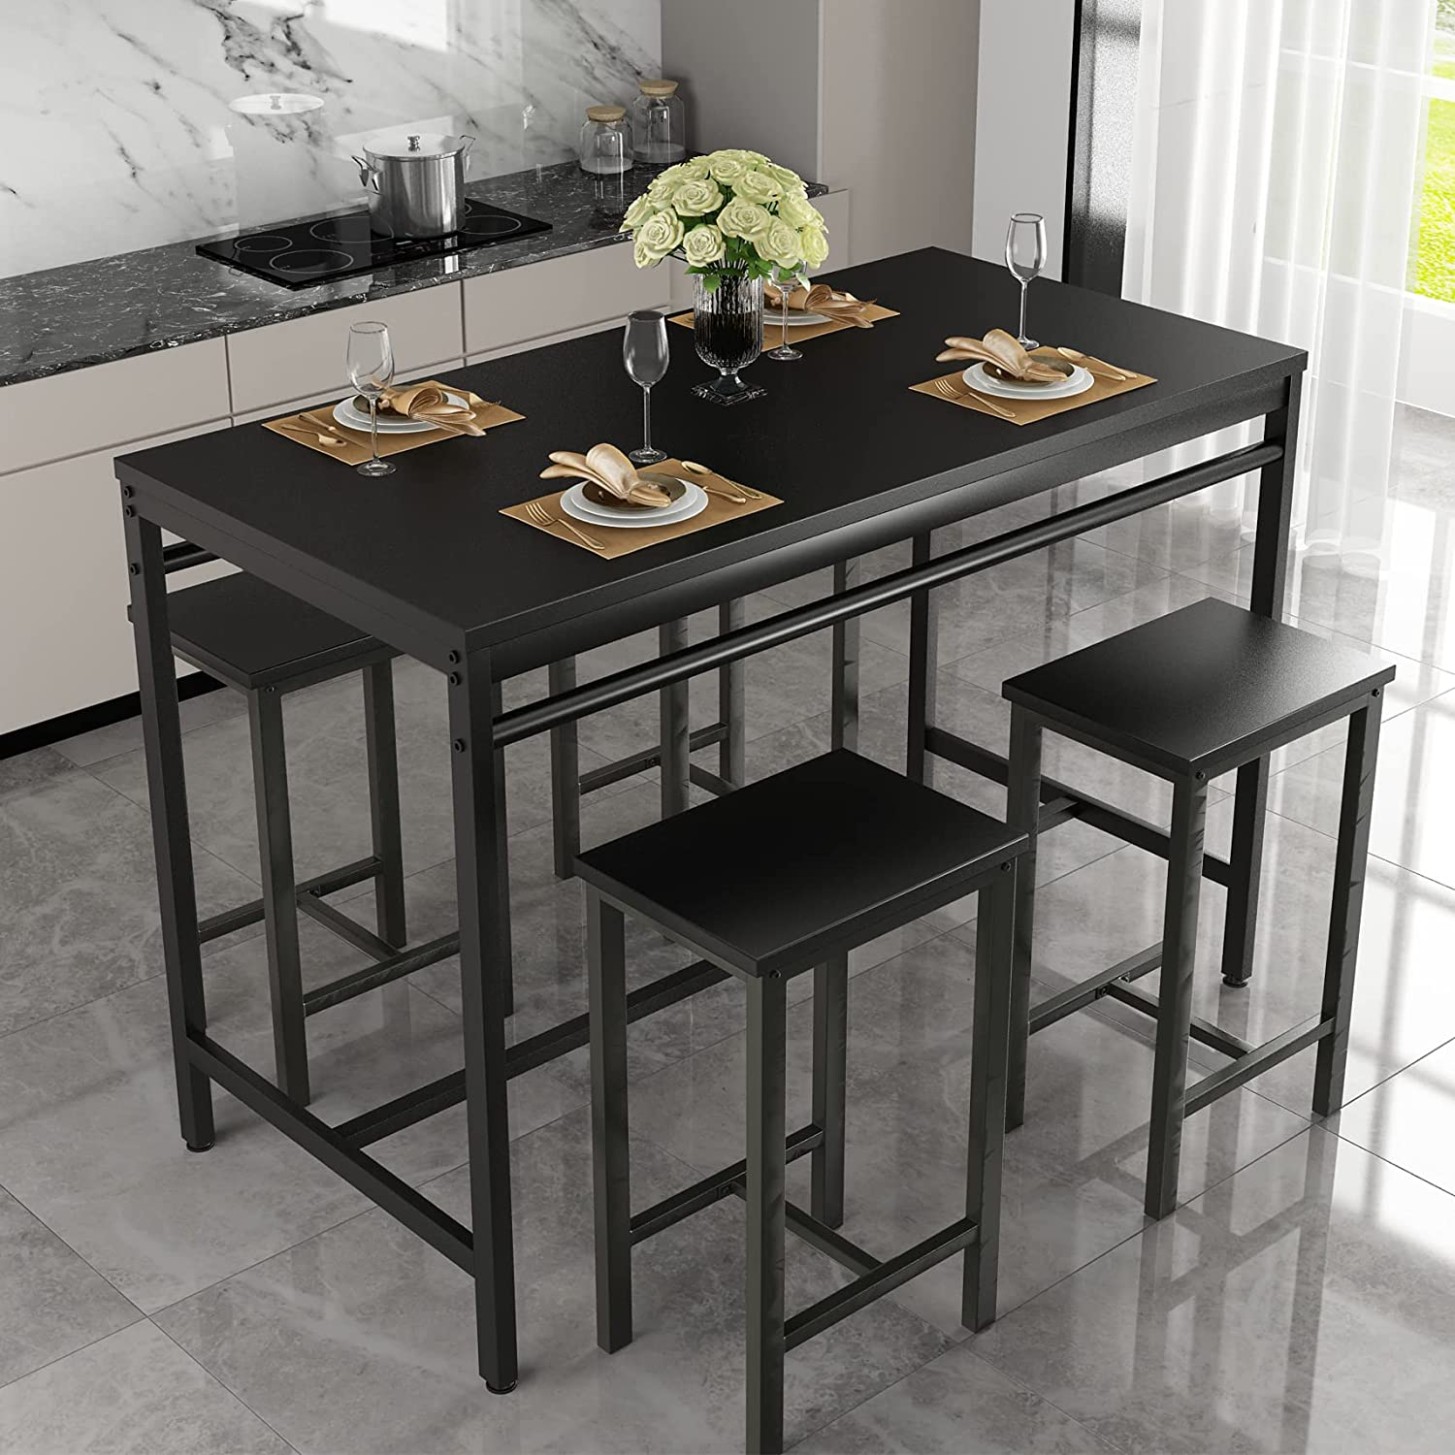 Hooseng AWQM 8 Pcs Dining Table Set, Modern Bar Height DiningTable & BarSet  with 8 Chairs, Home KitchenTable and ChairsSet Perfect for Kitchen,  - modern kitchen counter set